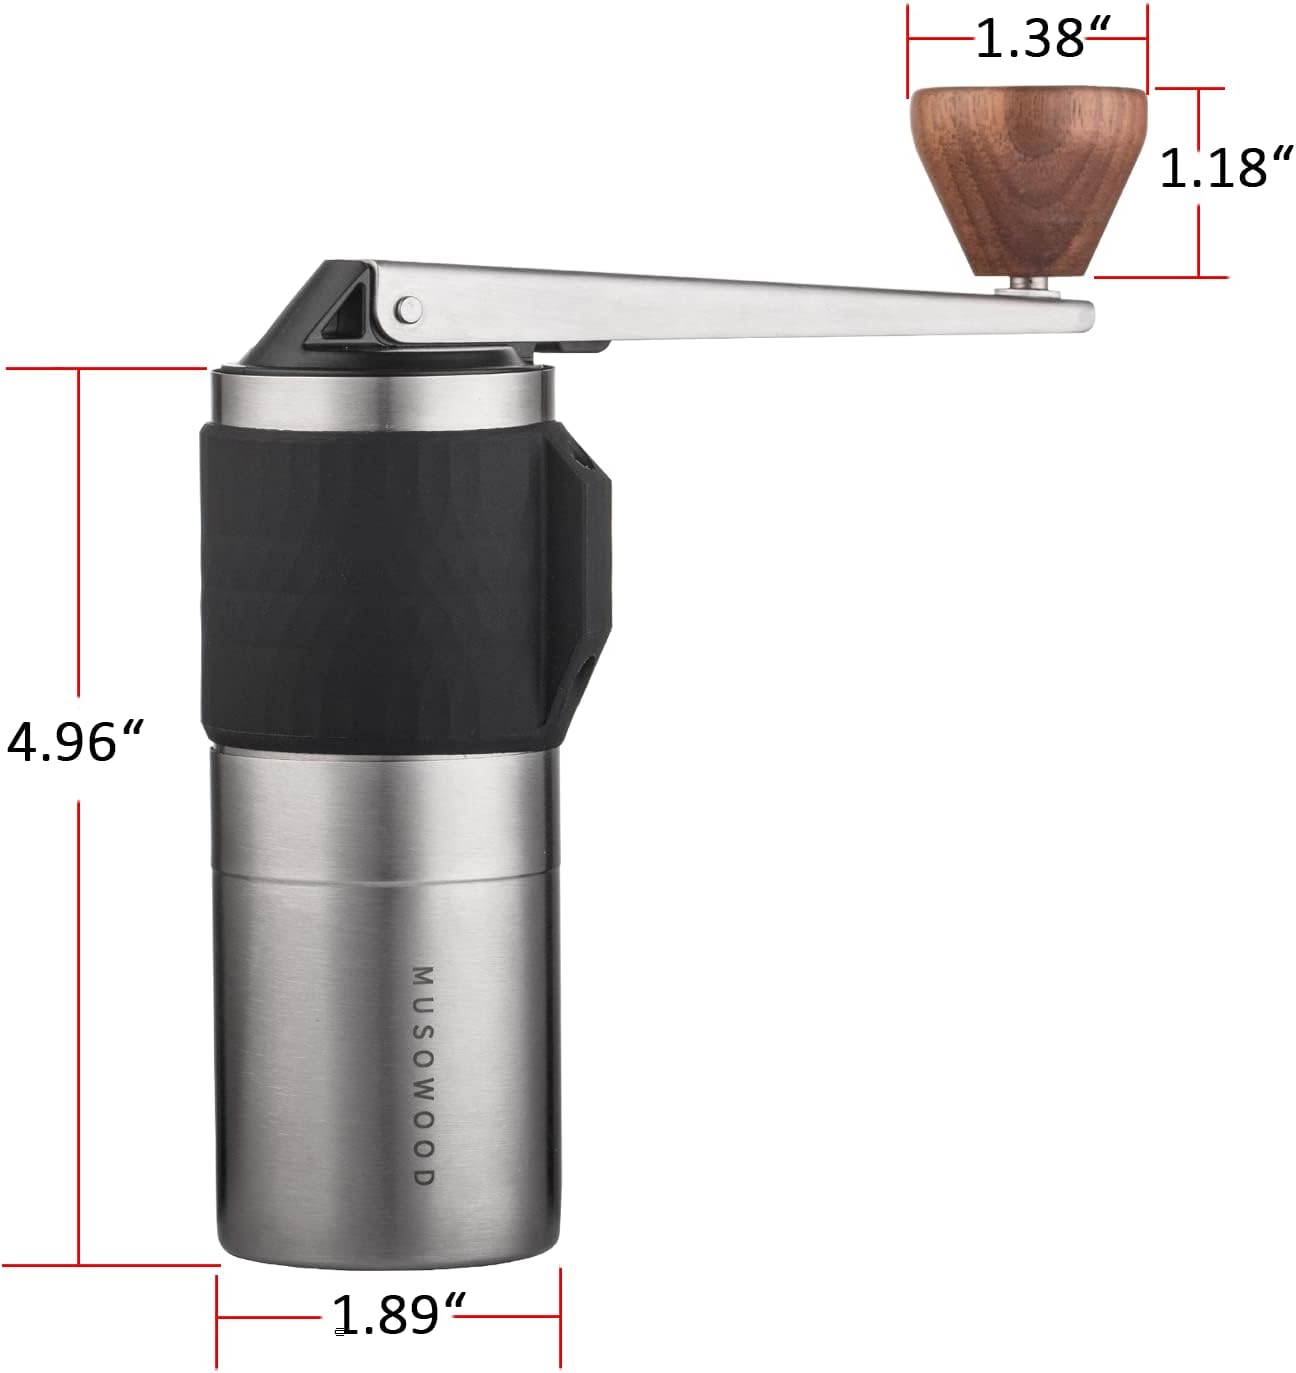 Muso Wood Manual Coffee Grinder Capacity 25g with CNC Adjustable Coarse and Fine Knob, Stainless Steel Conical Burr, Portable Coffee Grinder with Folding Handle.